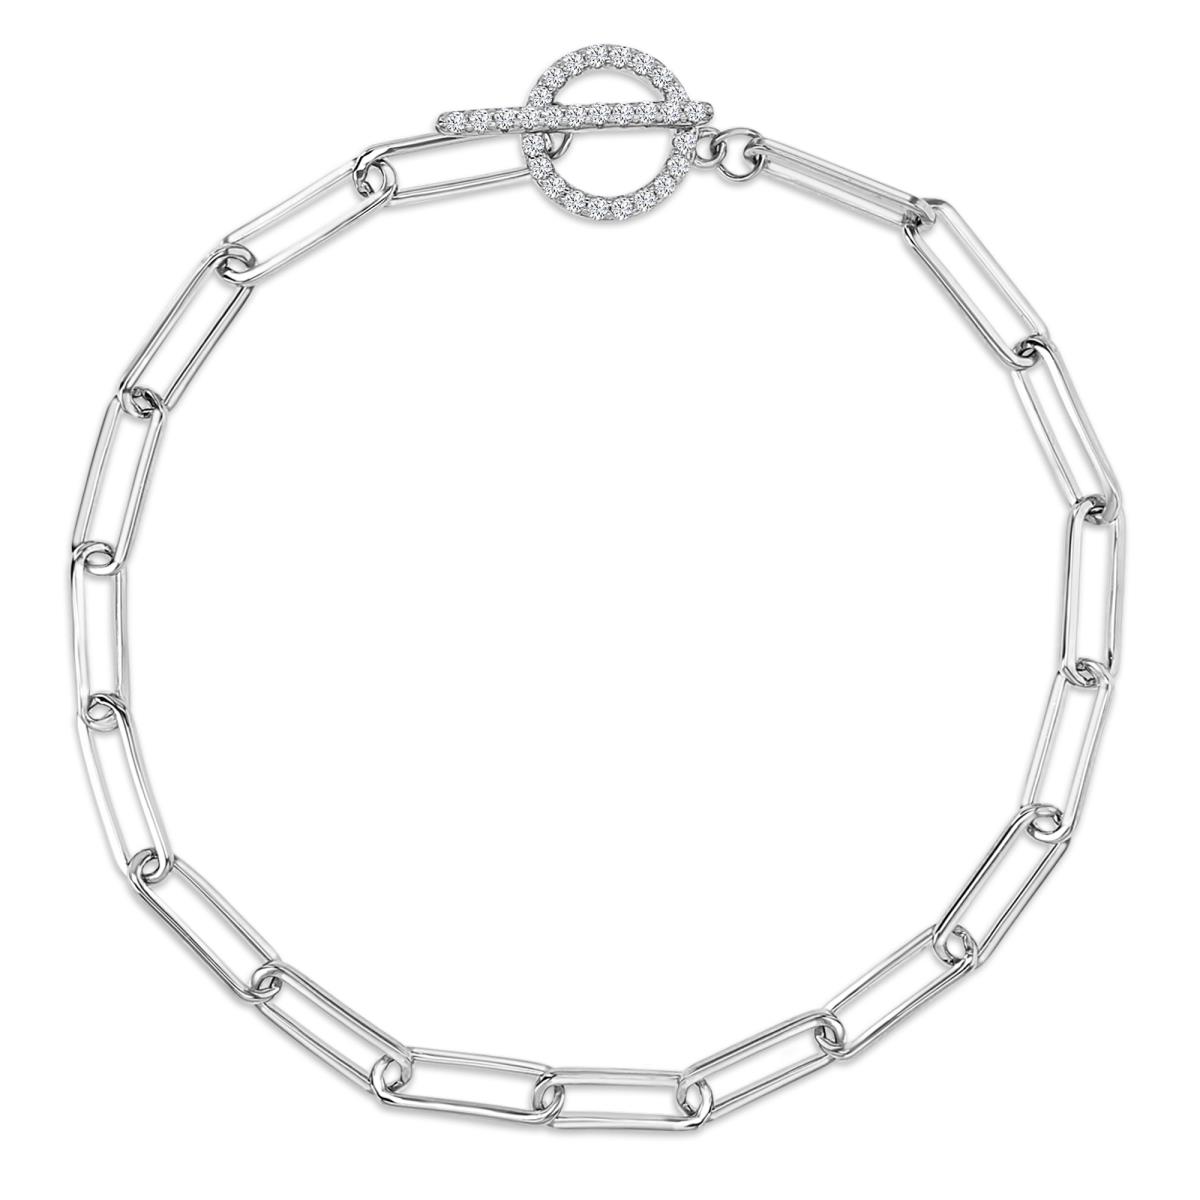 EXCLUSIVE RM Sterling Silver Rhodium 3.5mm Paperclip 6.75" Chain Bracelet with CZ Toggle